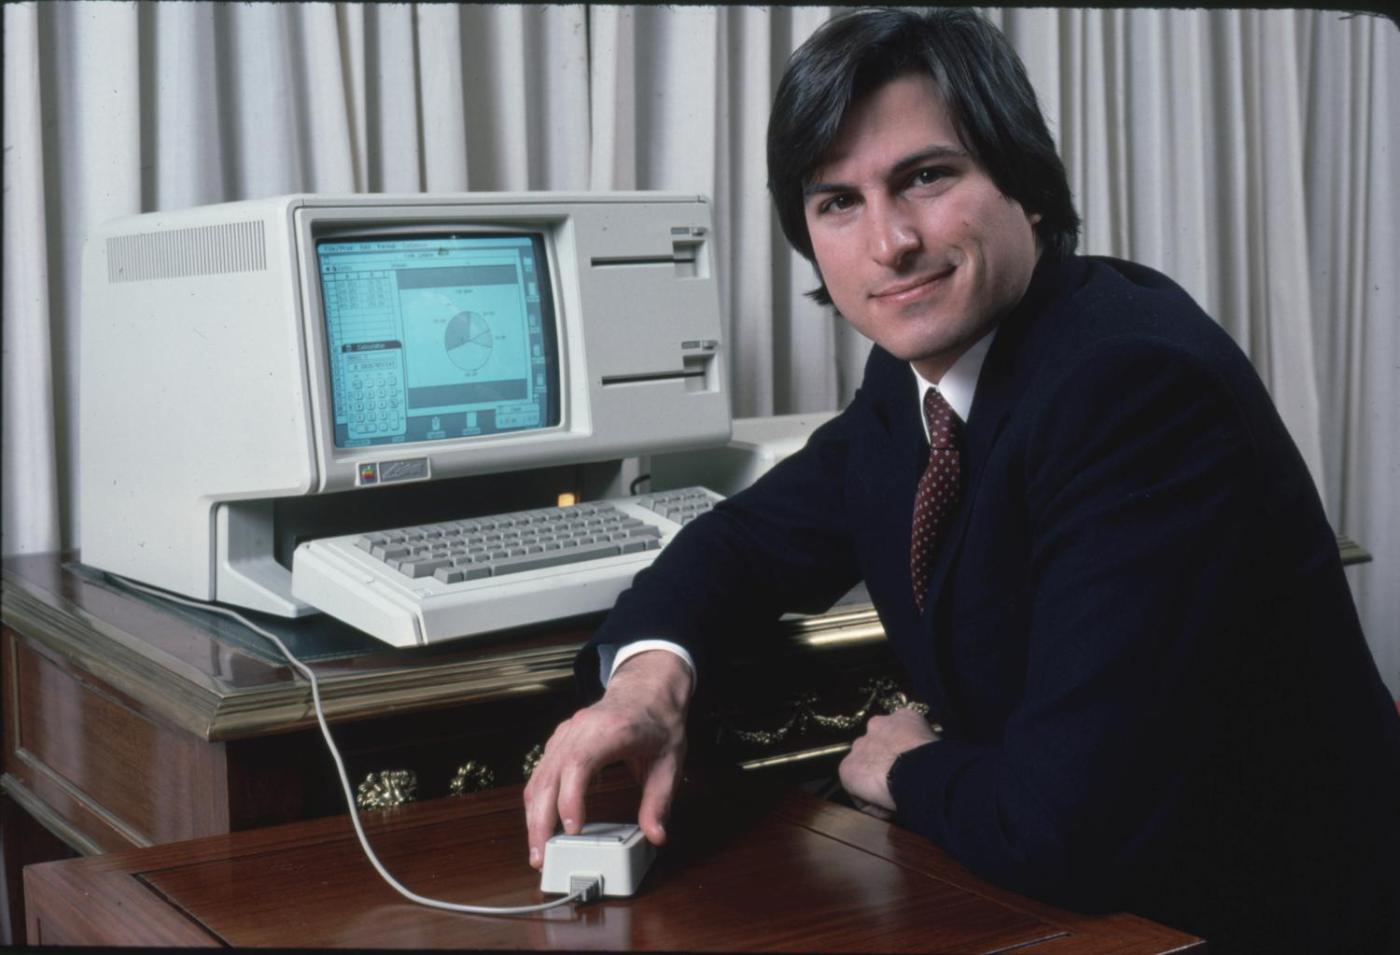 Steve Jobs poses with the Lisa computer during a 1983 press preview. (Ted Thai—Time &amp; Life Pictures / Getty Images)